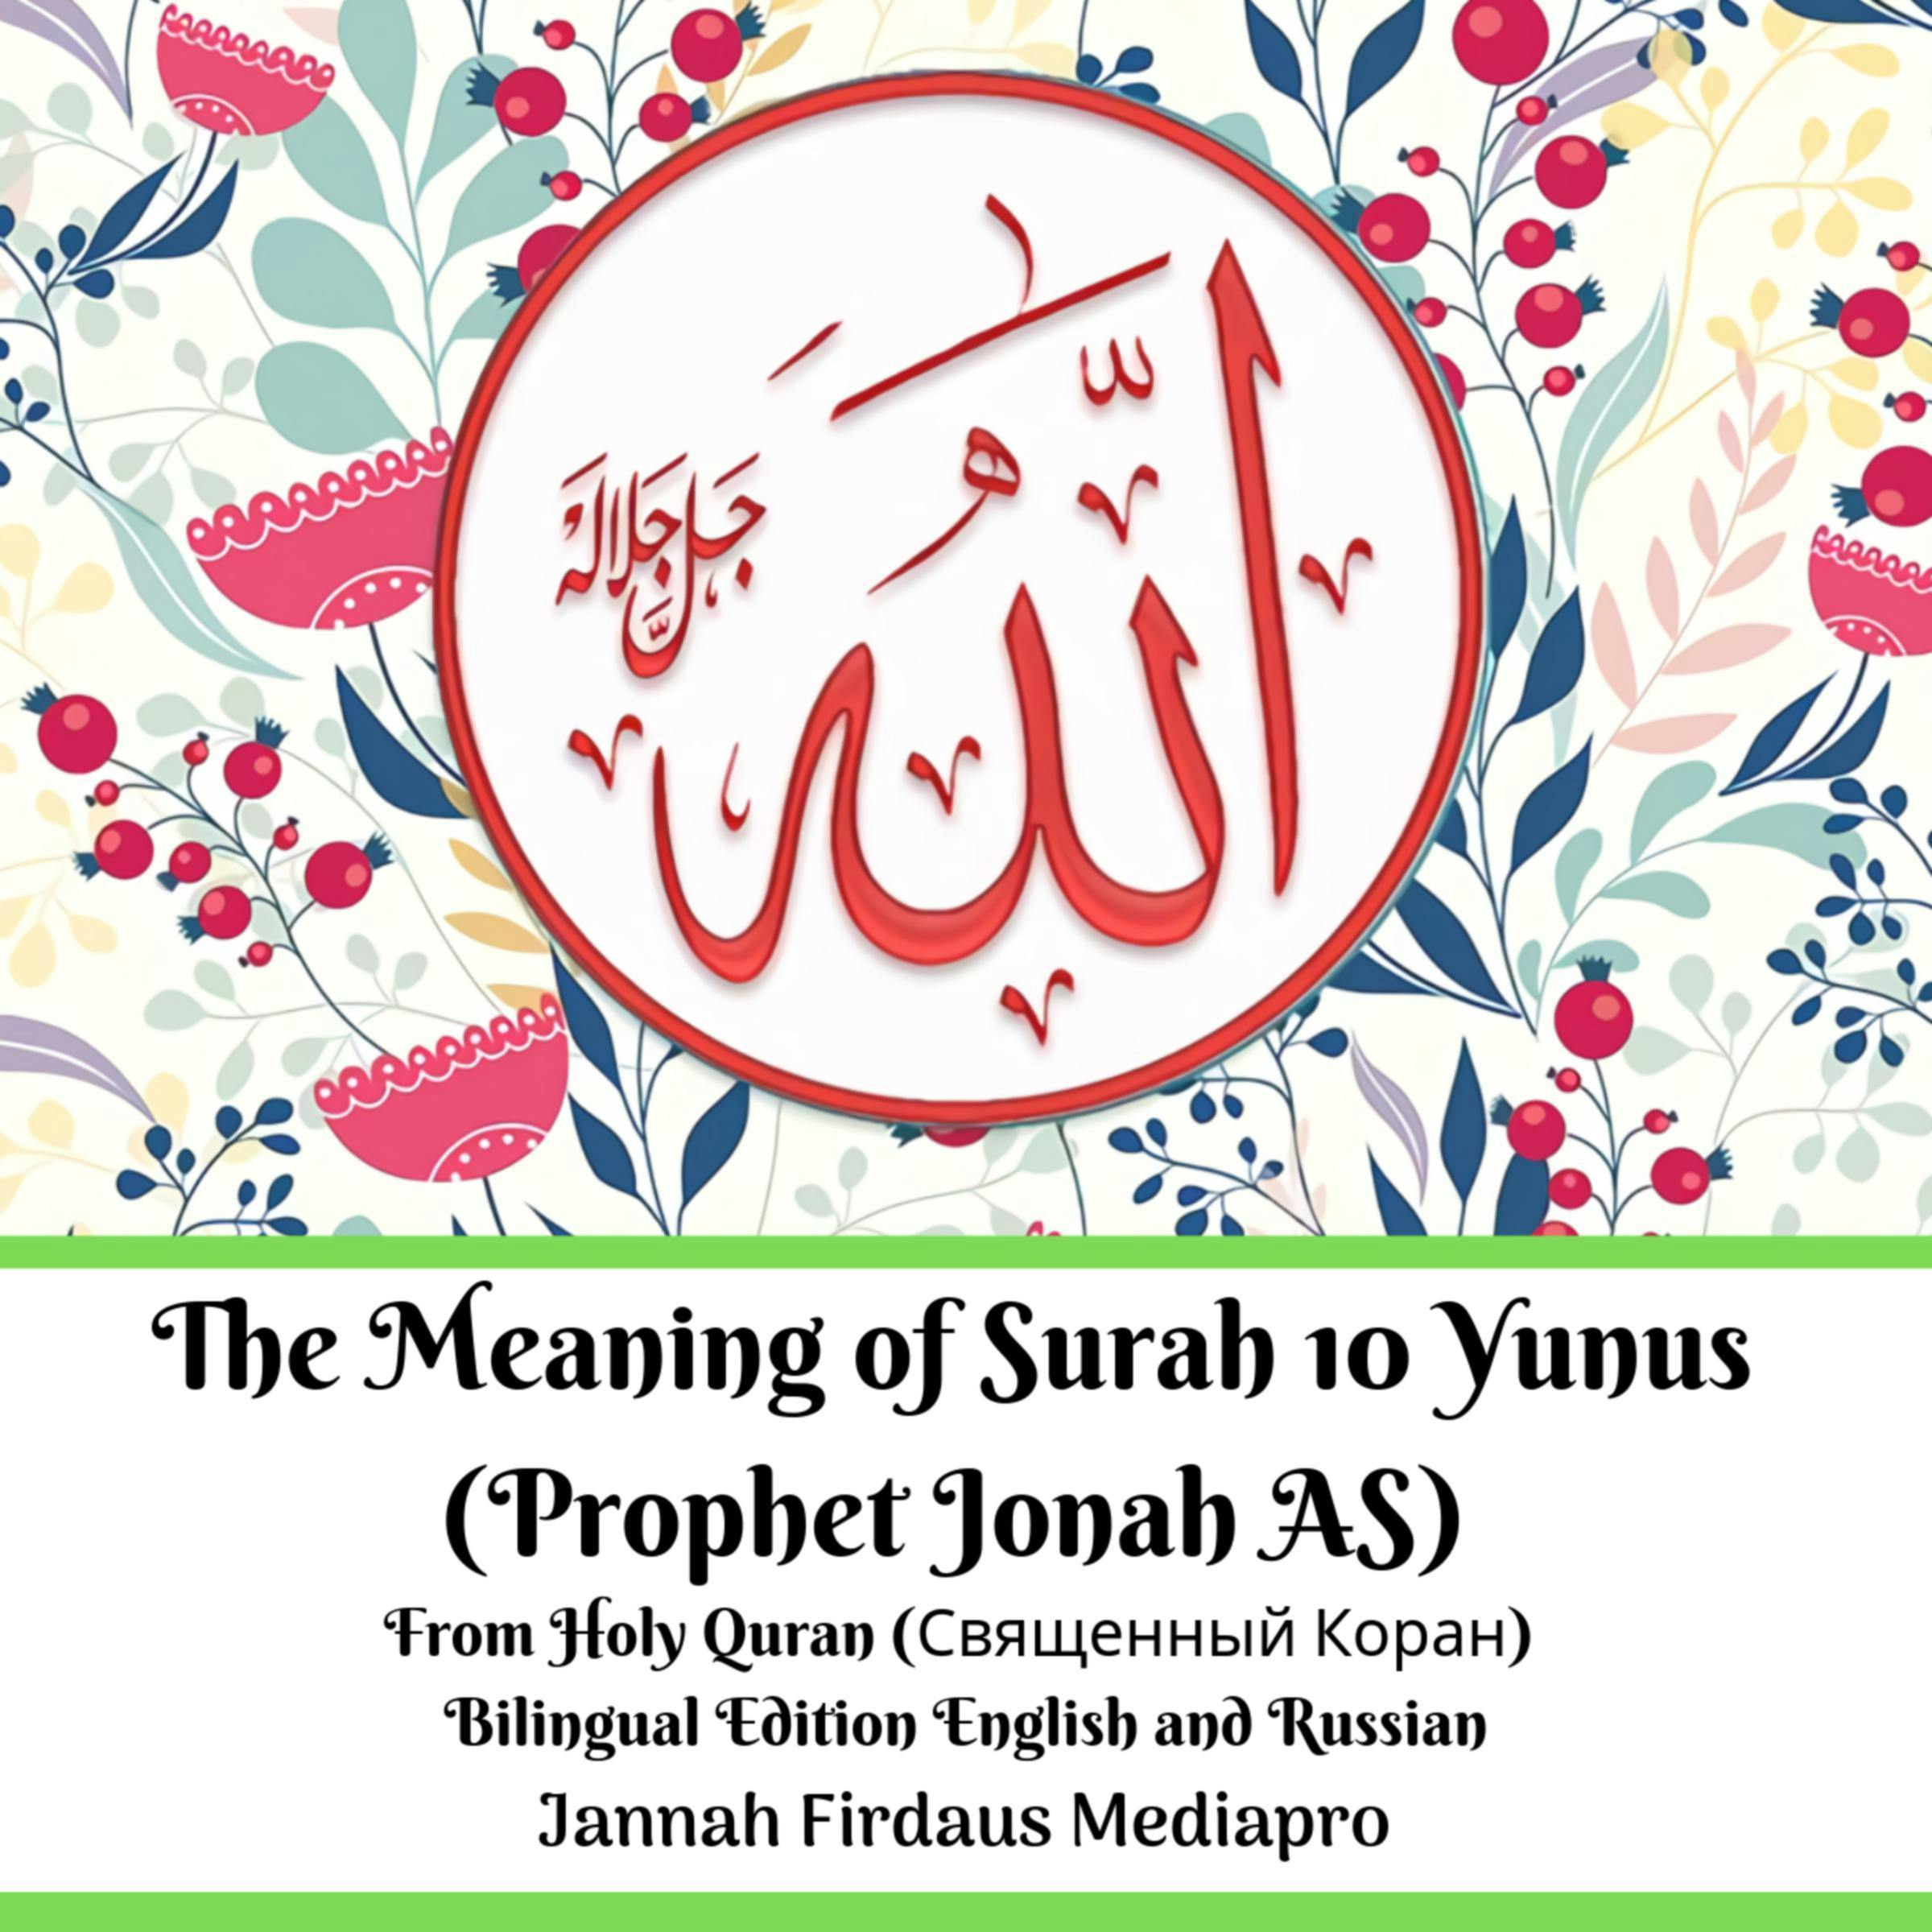 The Meaning of Surah 10 Yunus (Prophet Jonah AS) From Holy Quran (Священный Коран): Bilingual Edition English and Russian - undefined